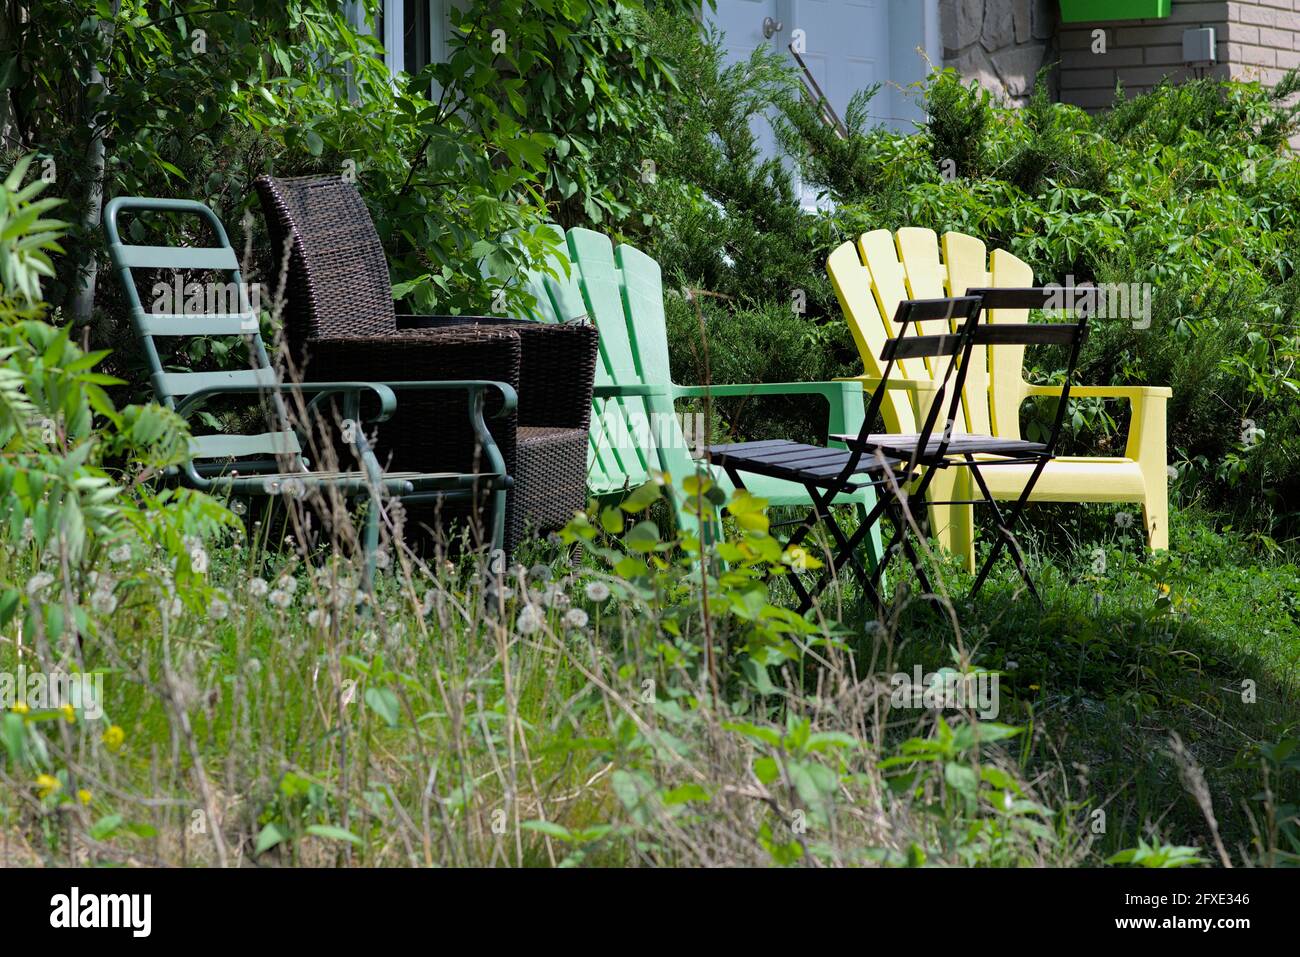 Eclectic group of garden chairs in late spring sunshine in a very overgrown front lawn of a house in Ottawa, Ontario, Canada. Stock Photo